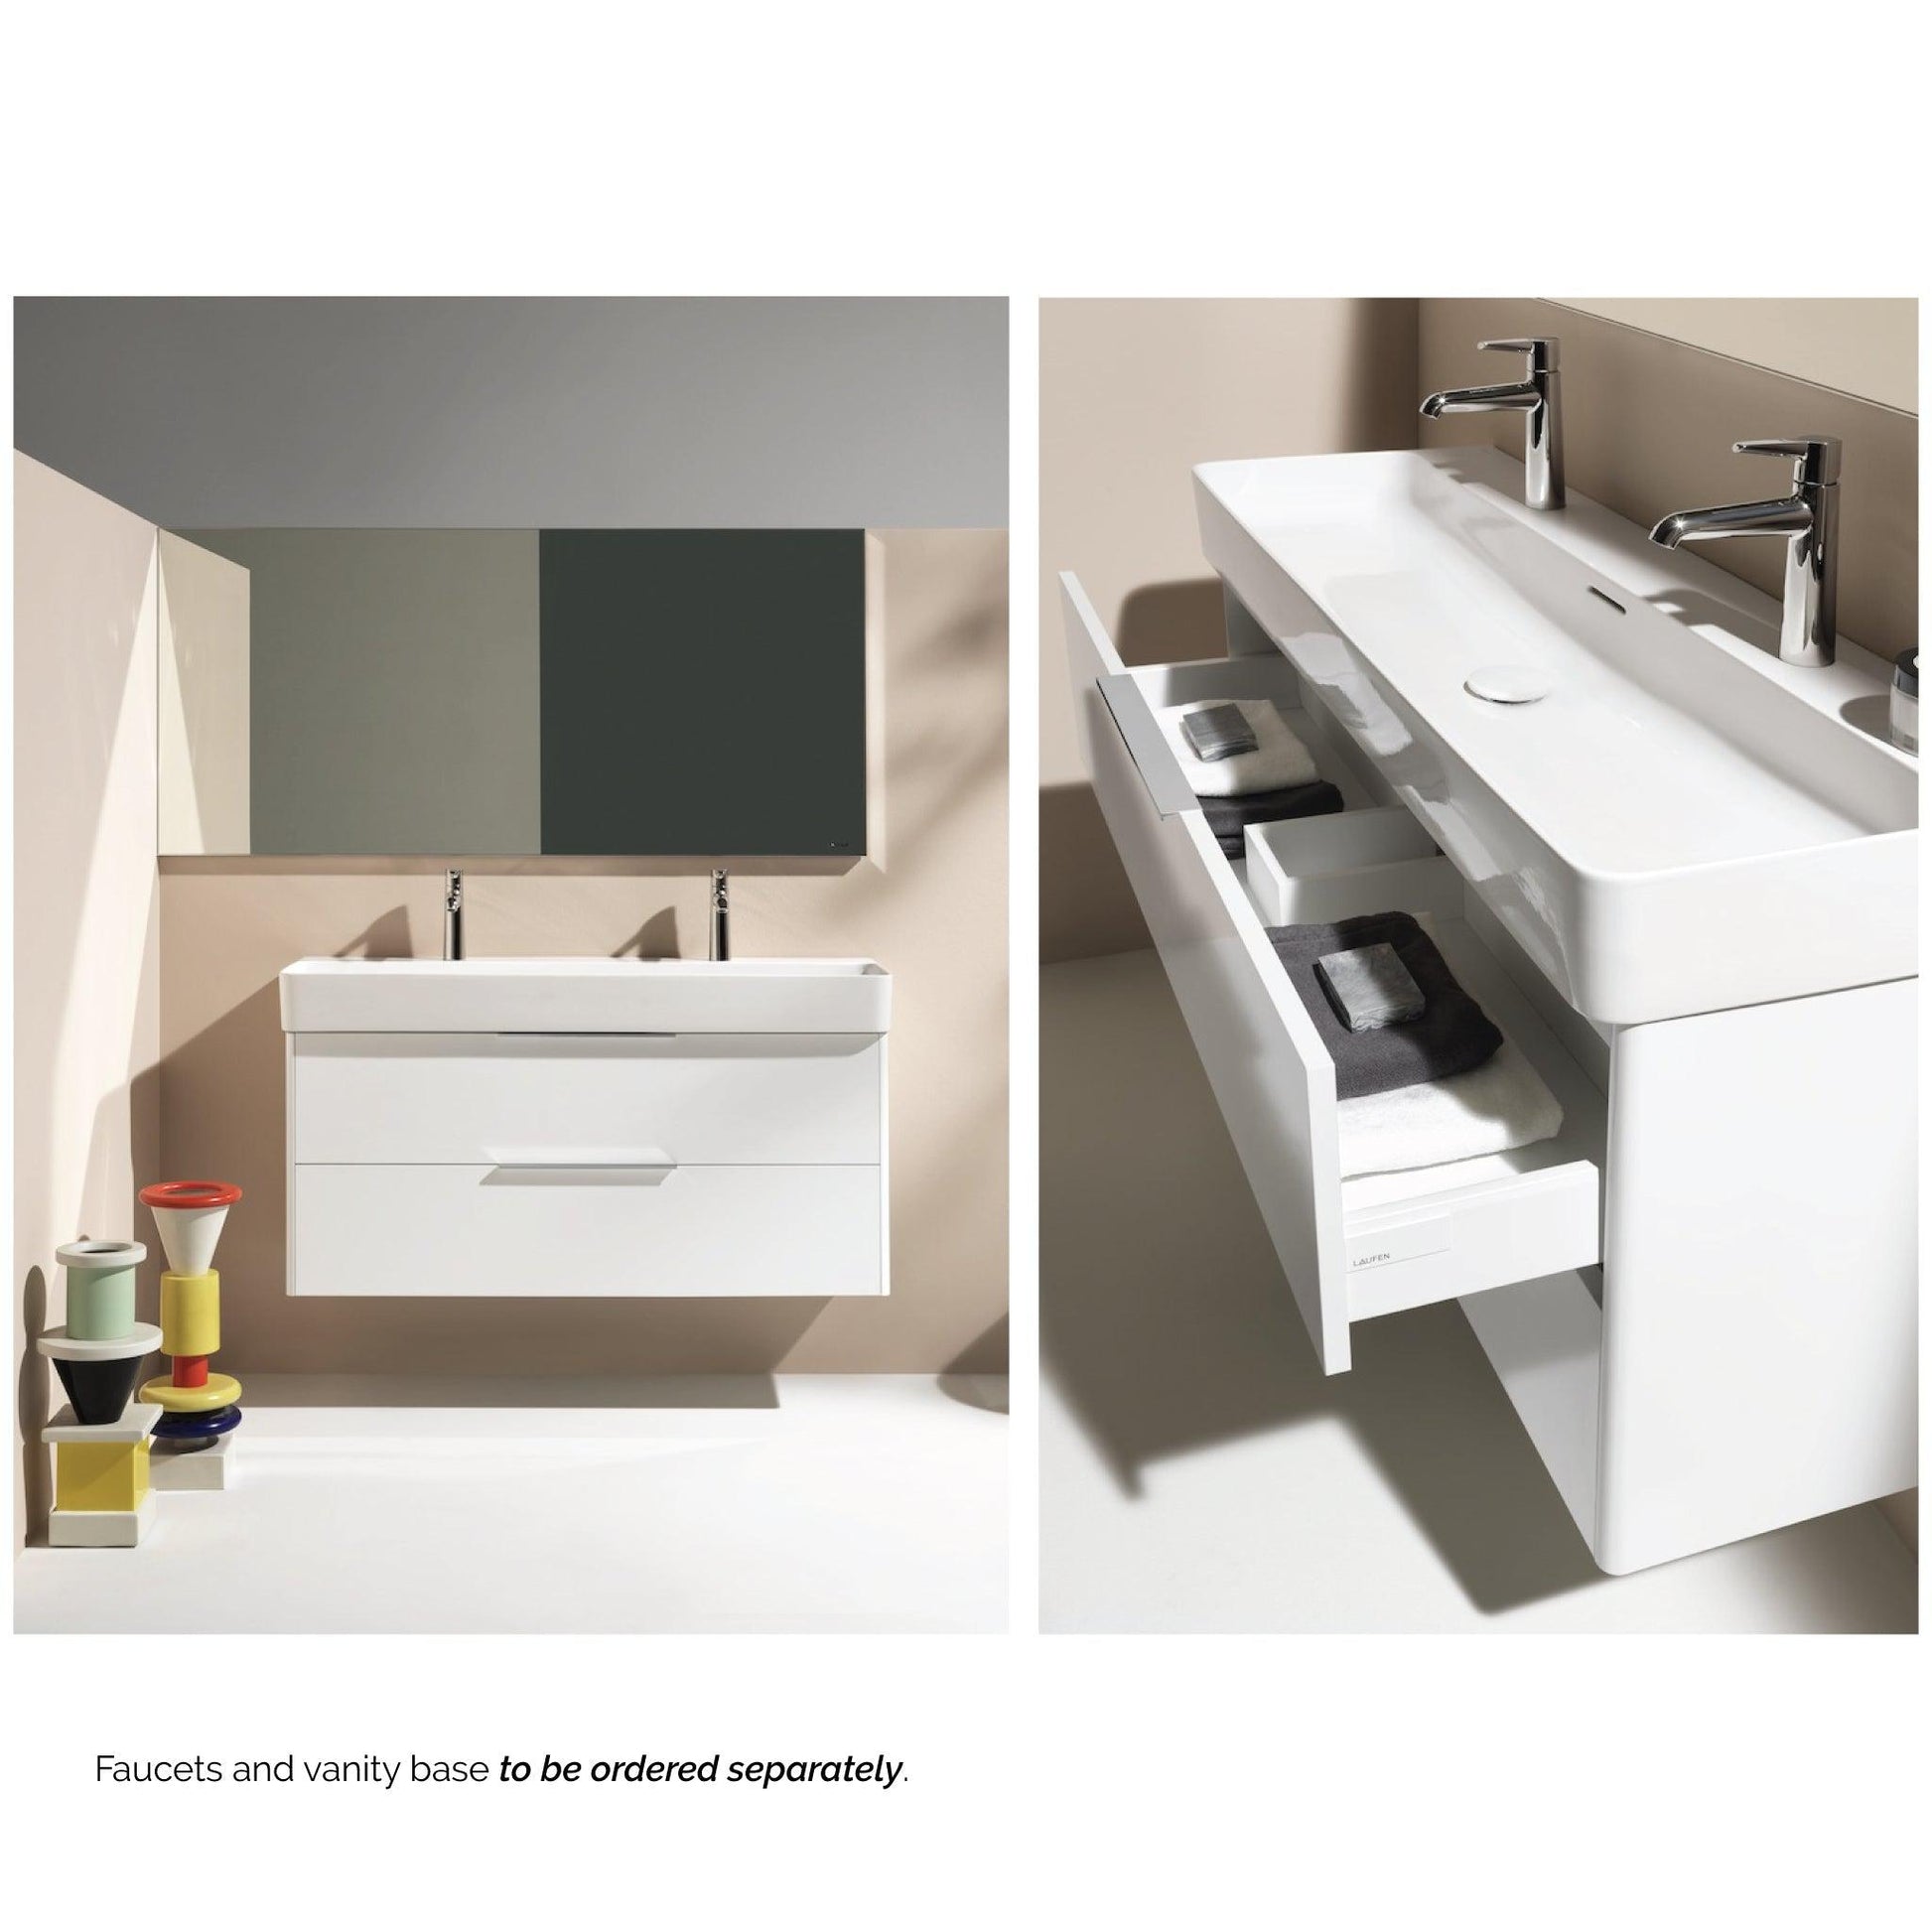 Laufen Val 47" x 17" White Ceramic Wall-Mounted Trough Bathroom Sink With 2 Faucet Holes